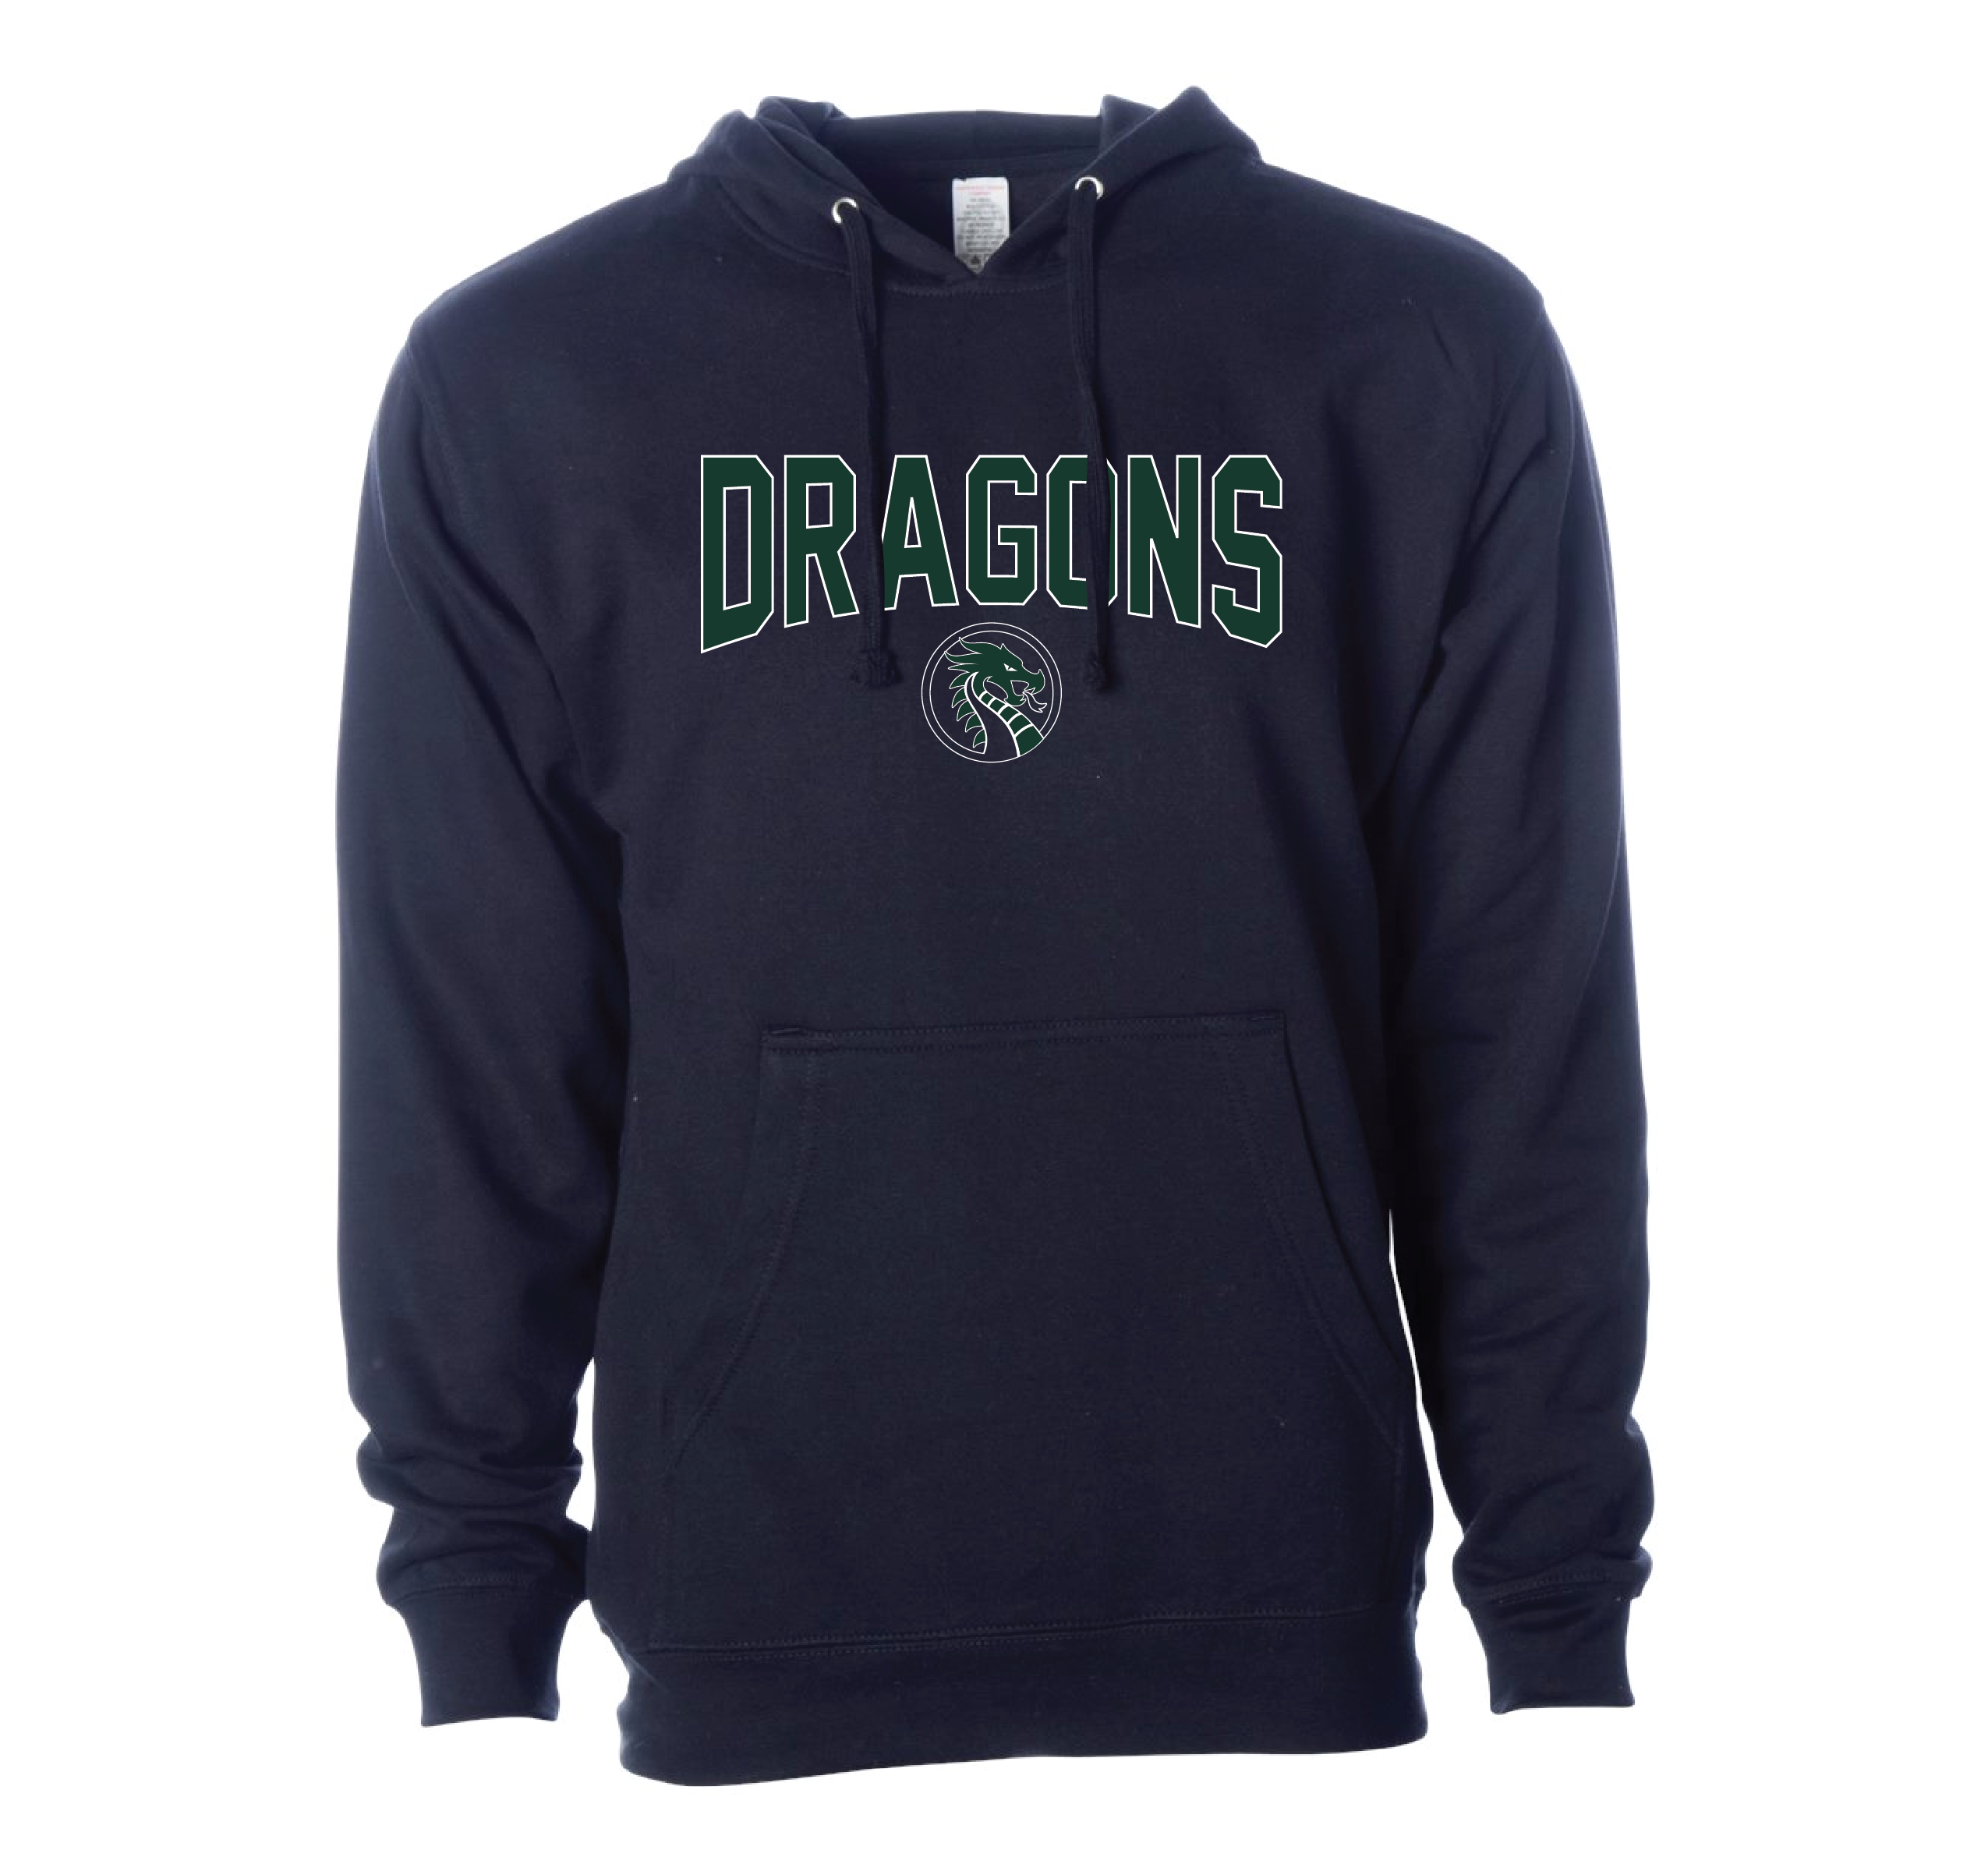 Dragons Arched Hooded Sweatshirt